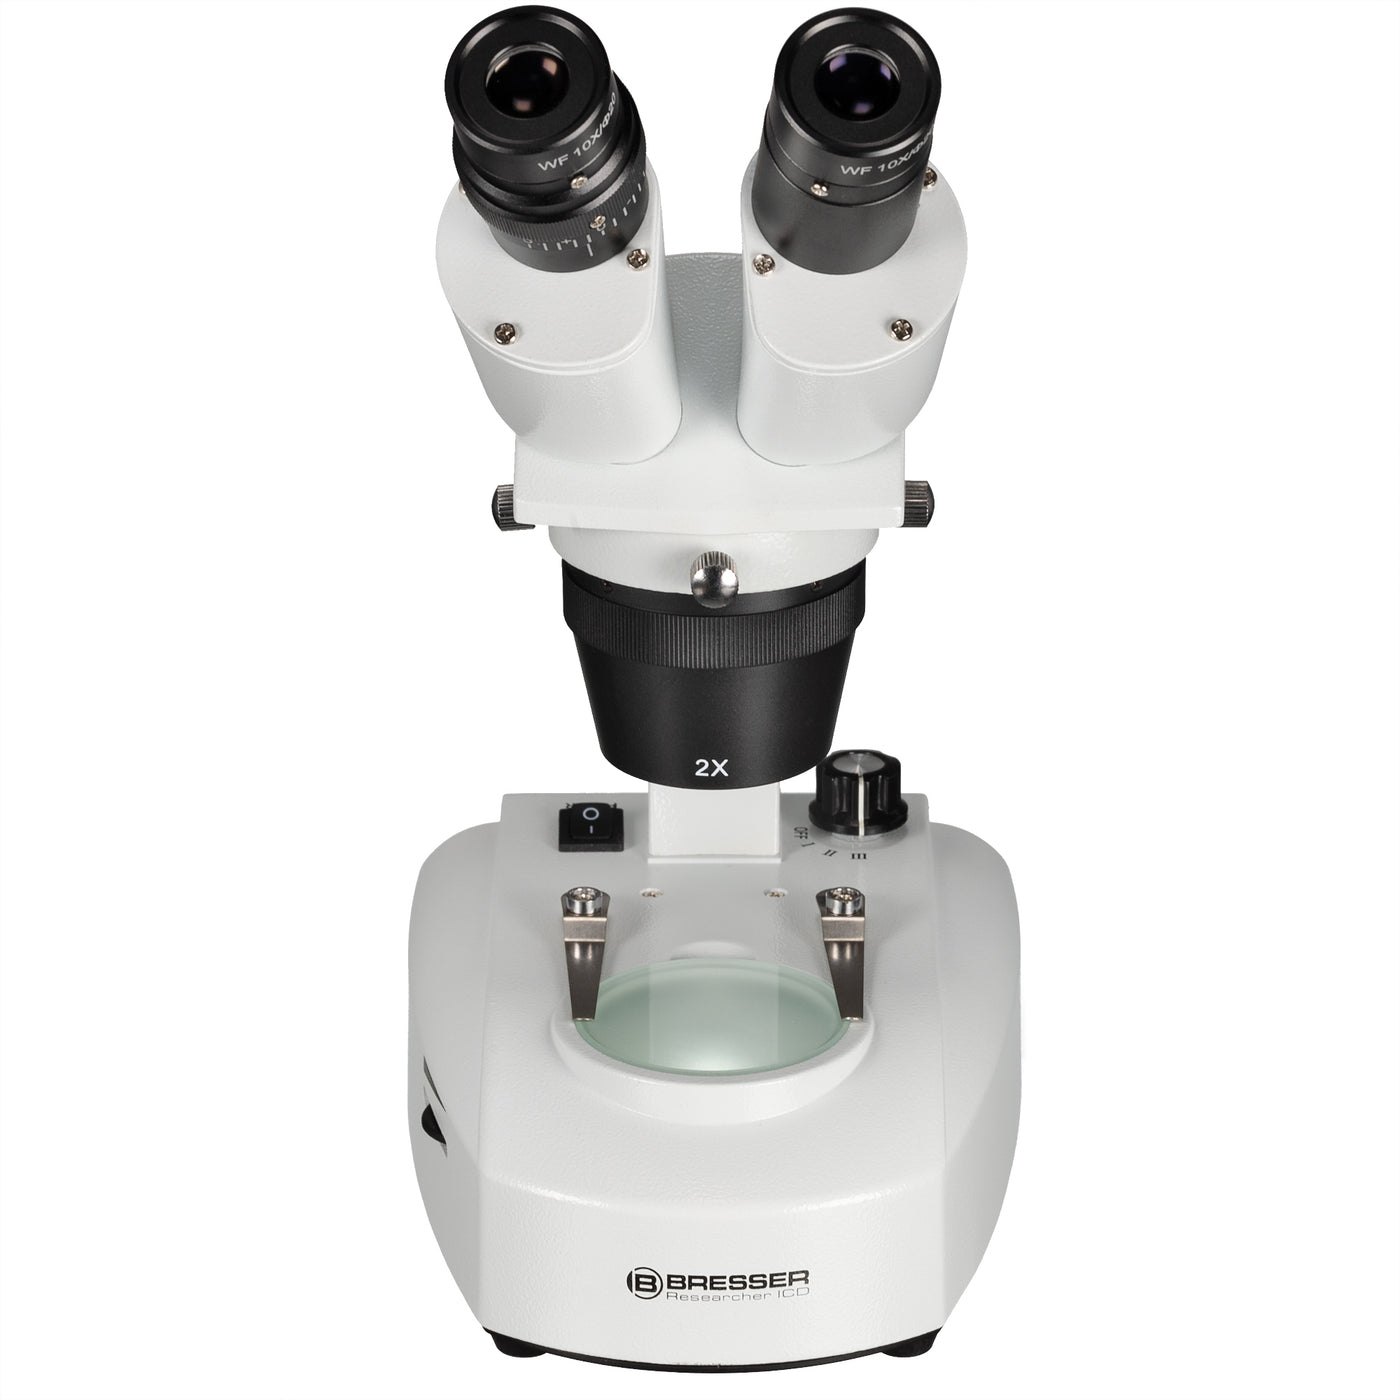 Researcher ICD Stereo Microscope